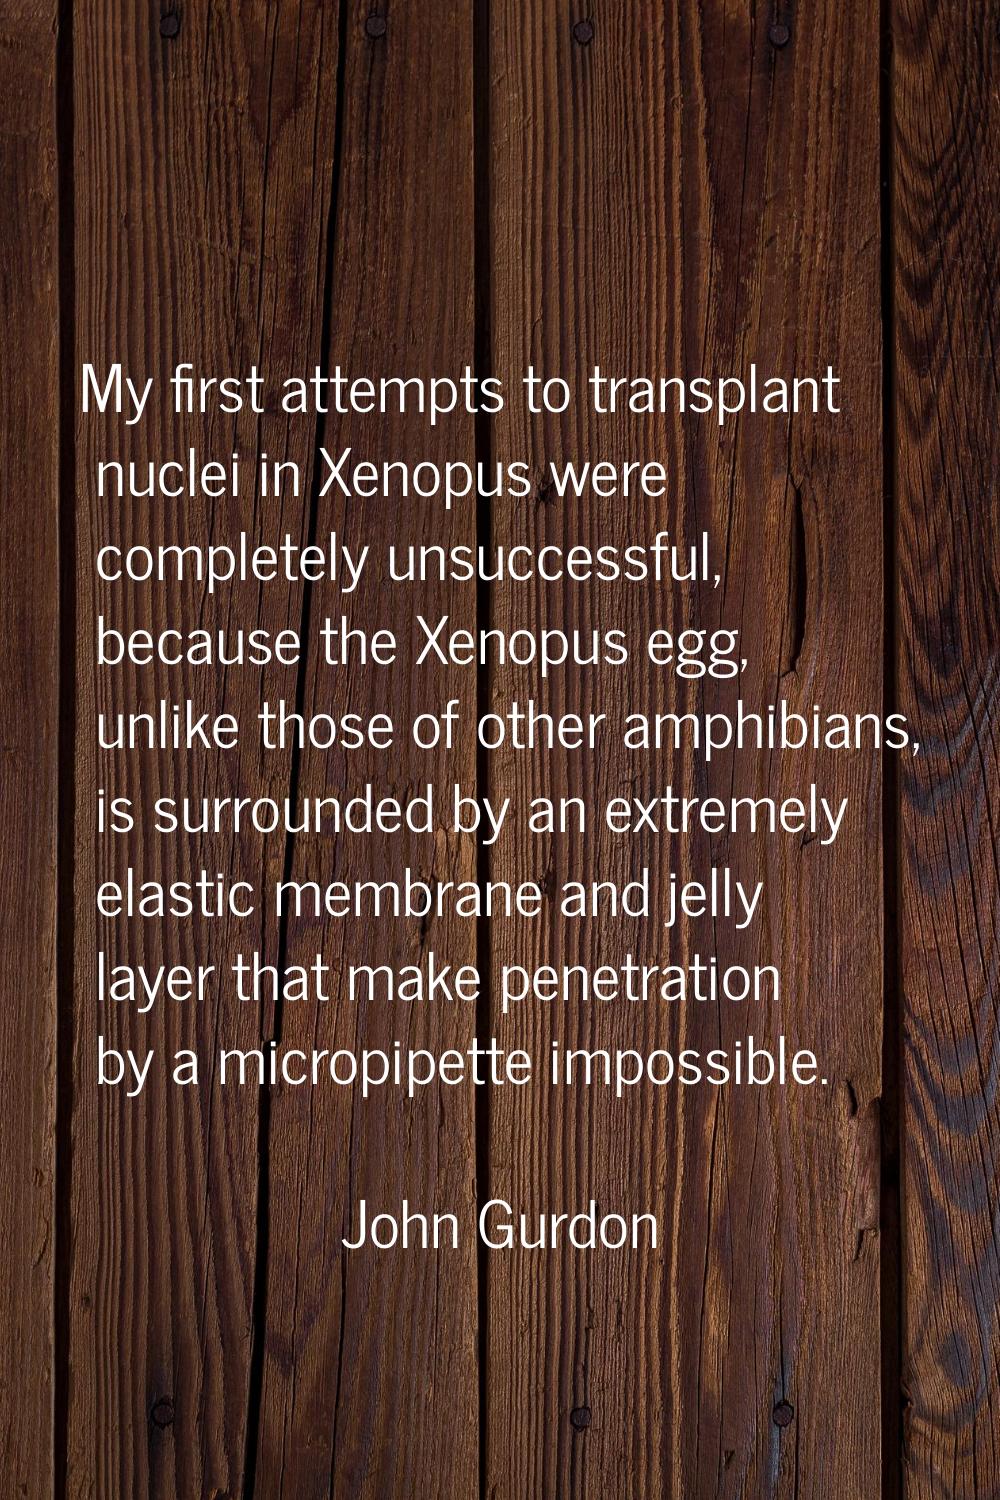 My first attempts to transplant nuclei in Xenopus were completely unsuccessful, because the Xenopus